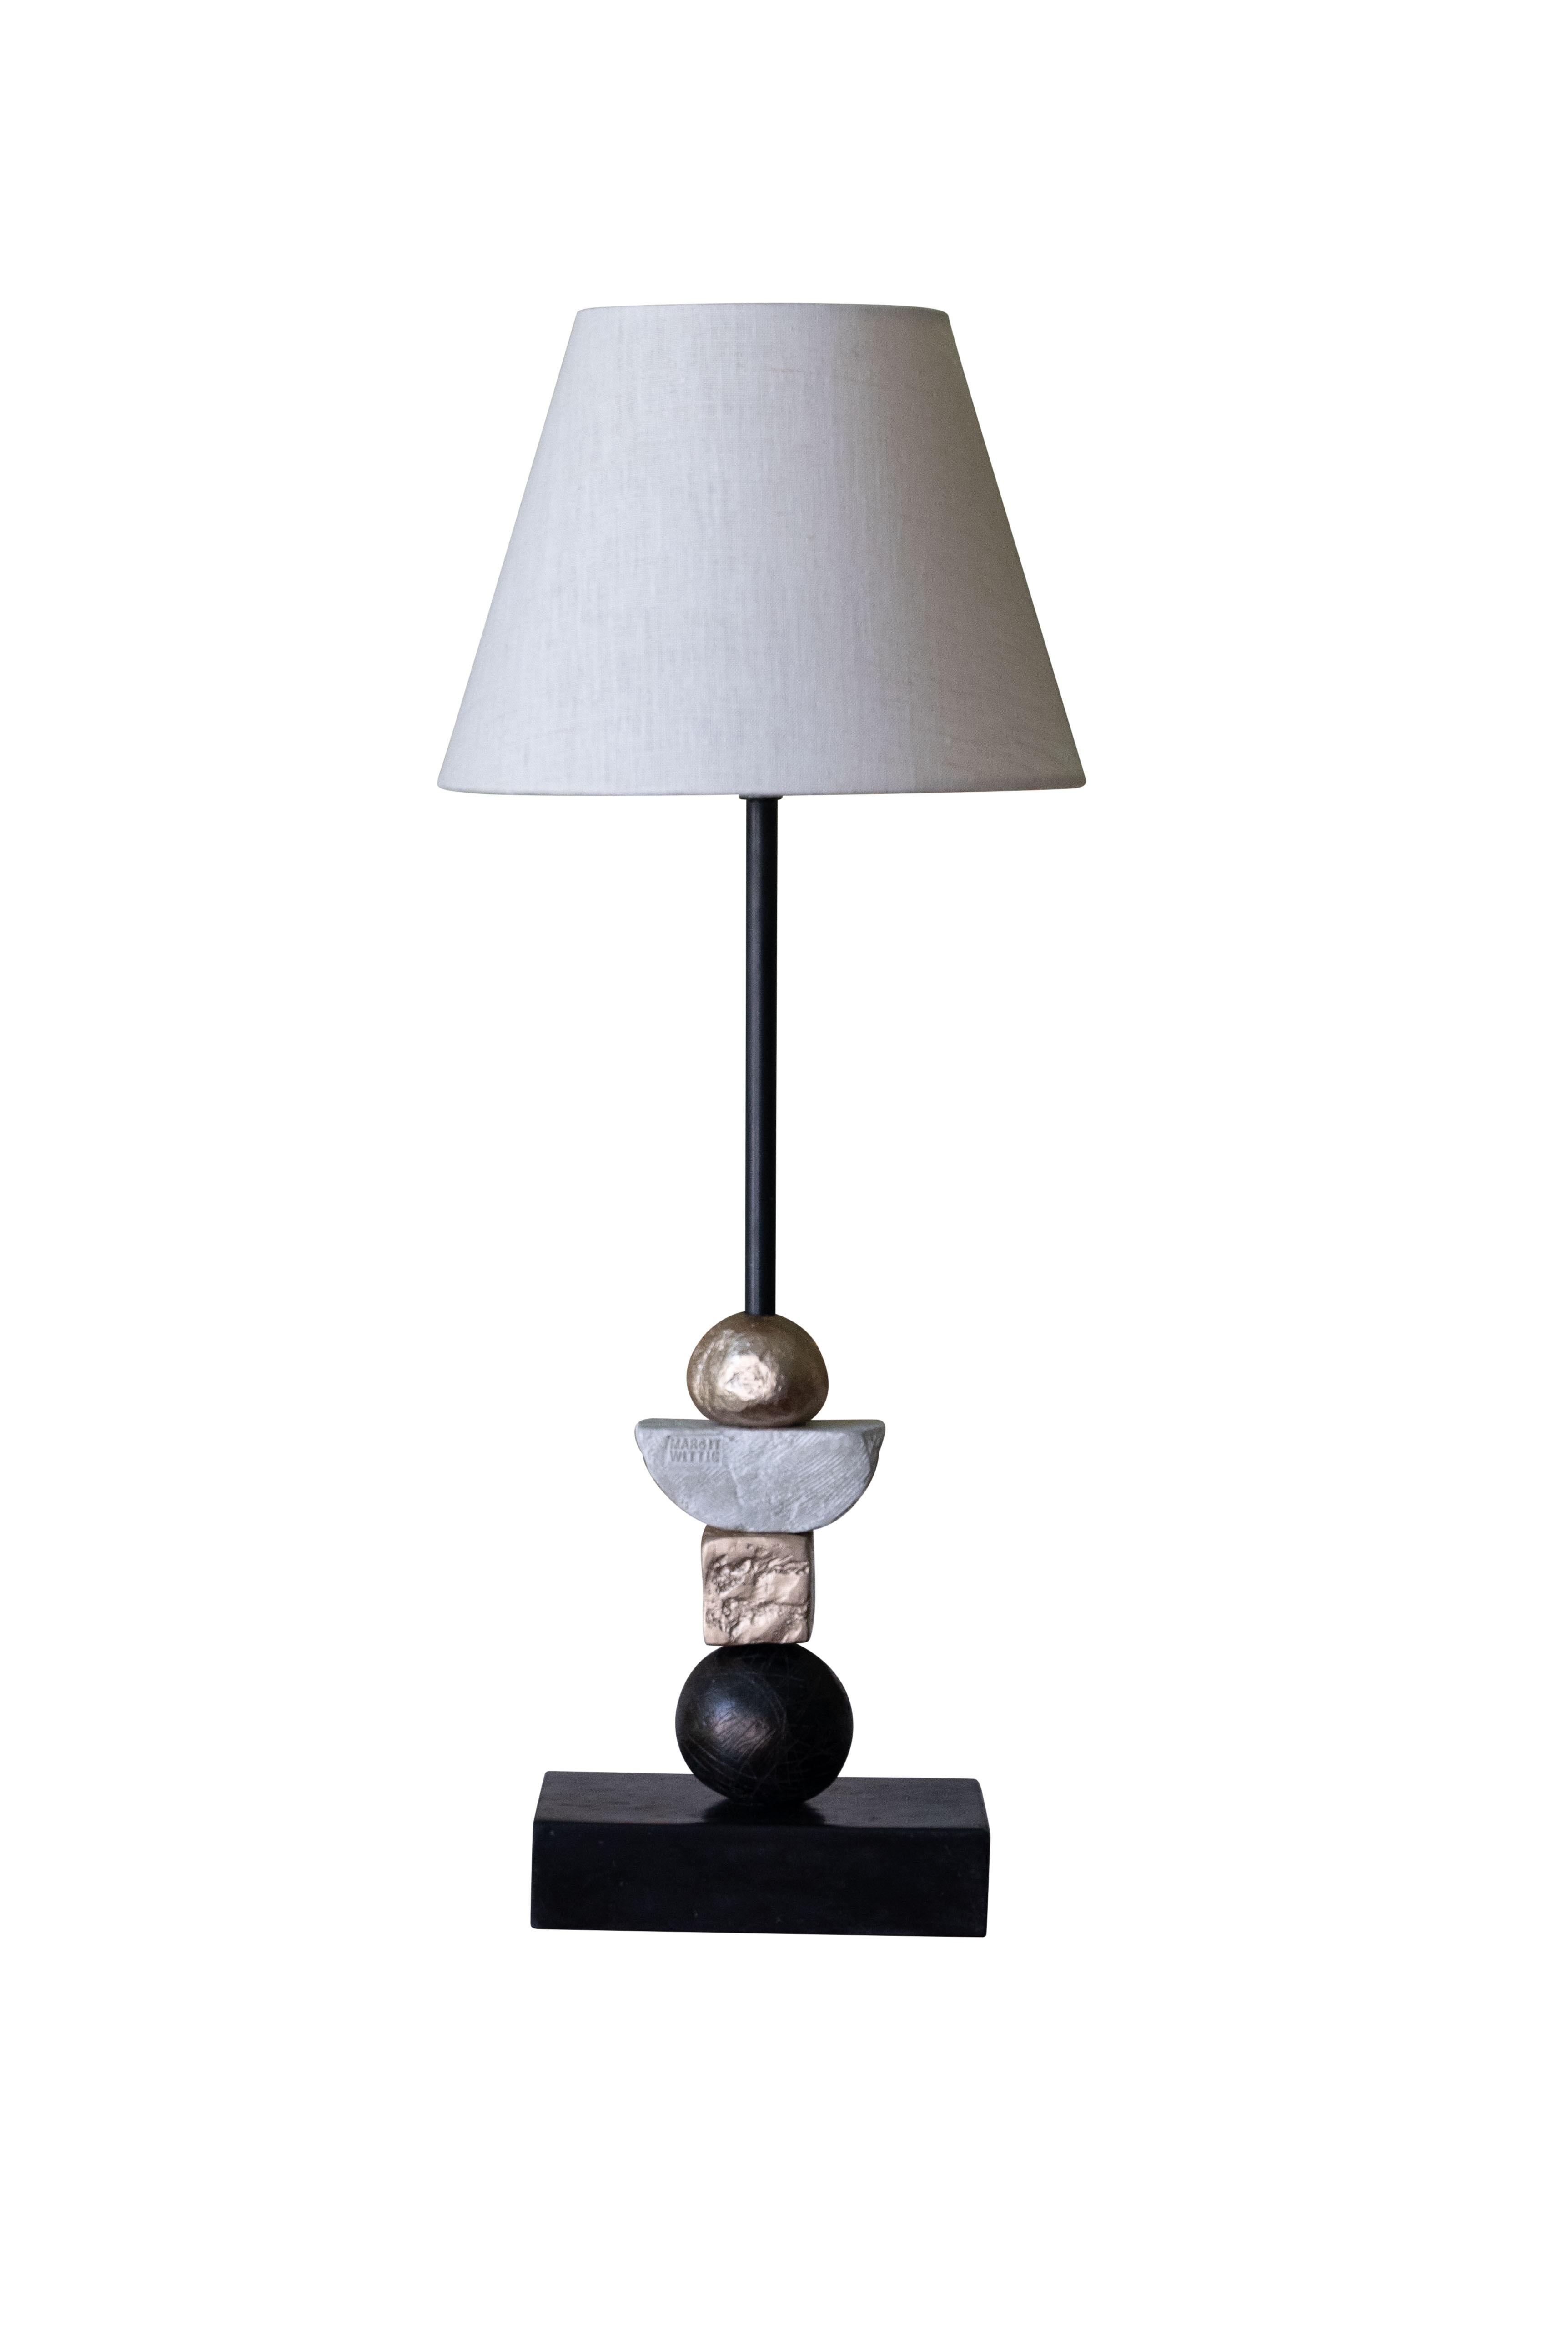 This contemporary monochromatic Margit Wittig table lamp is mounted on a slate base and features multiple resin handcrafted resin components. Each element is cast and patinated to increase tonal contrast and enhance the surface texture. The 22-karat